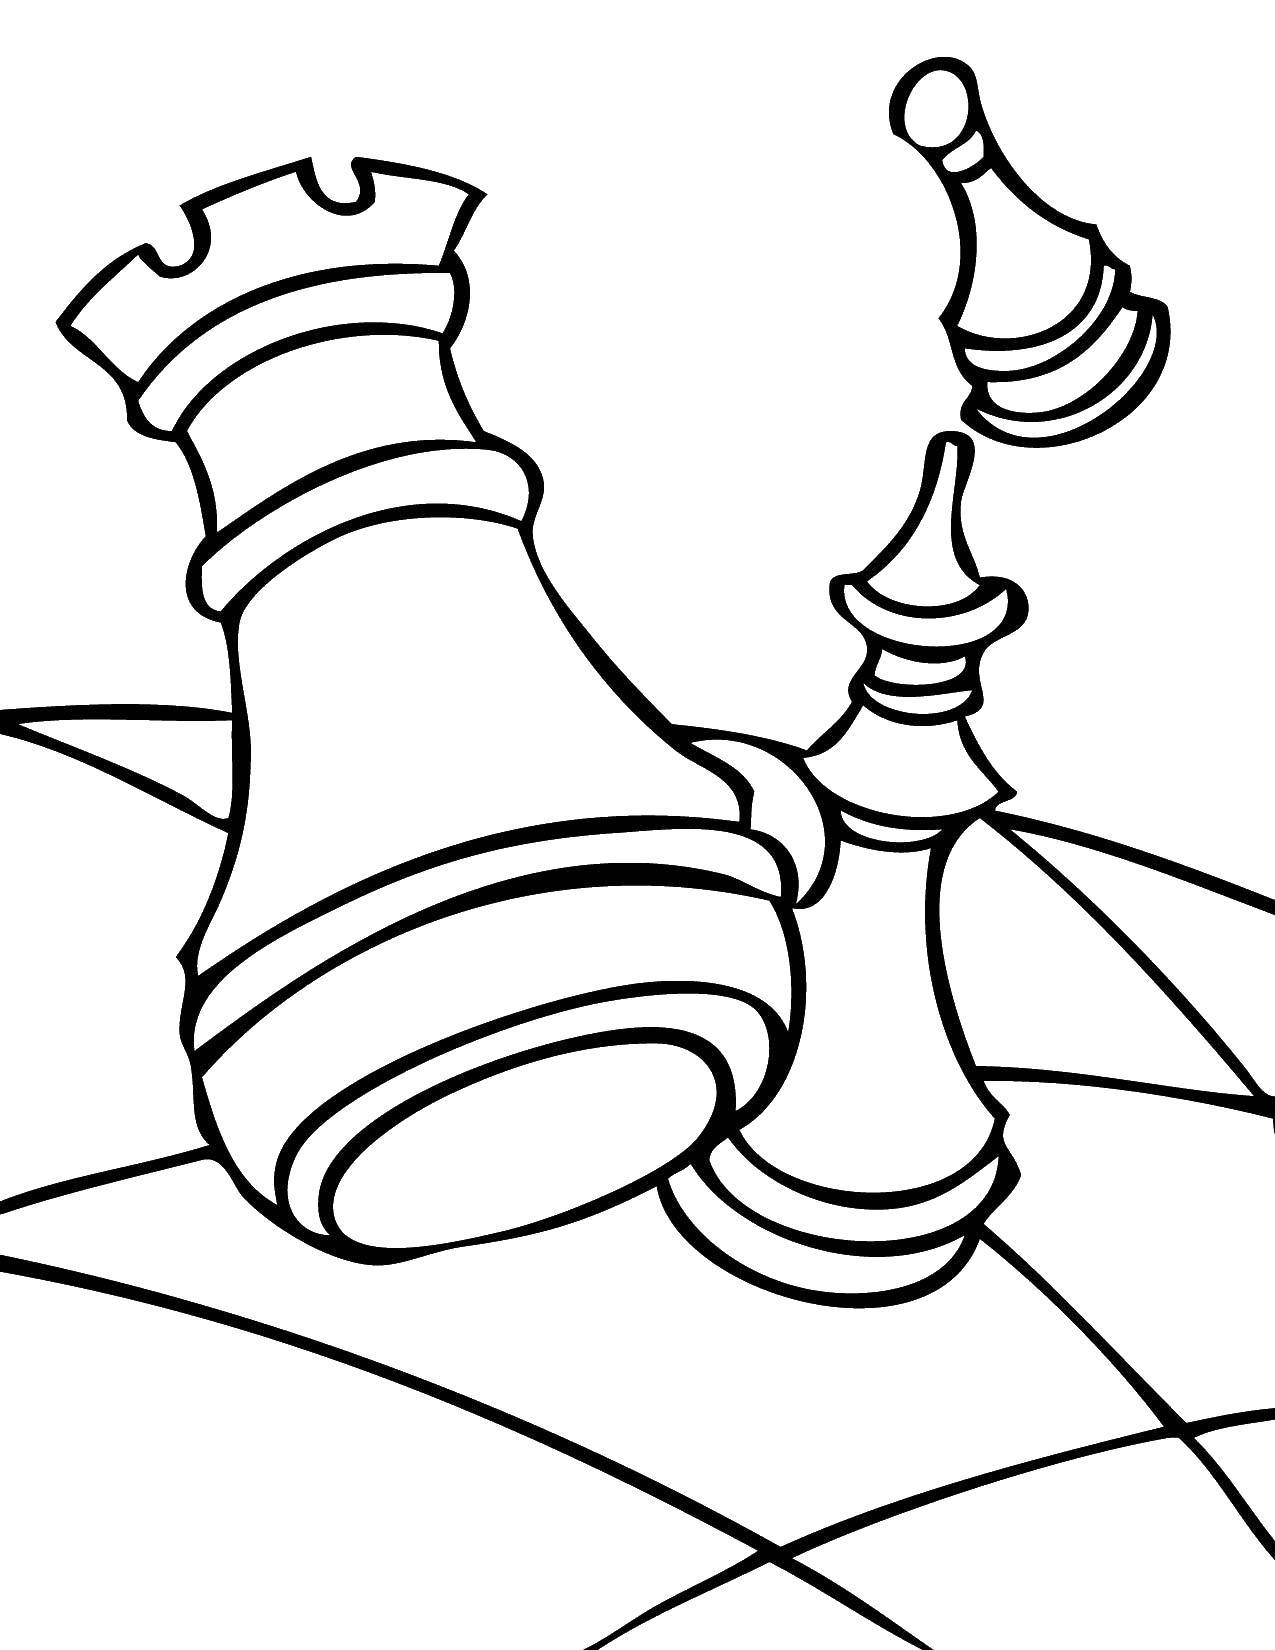 Coloring Chess. Category Chess. Tags:  chess, game.